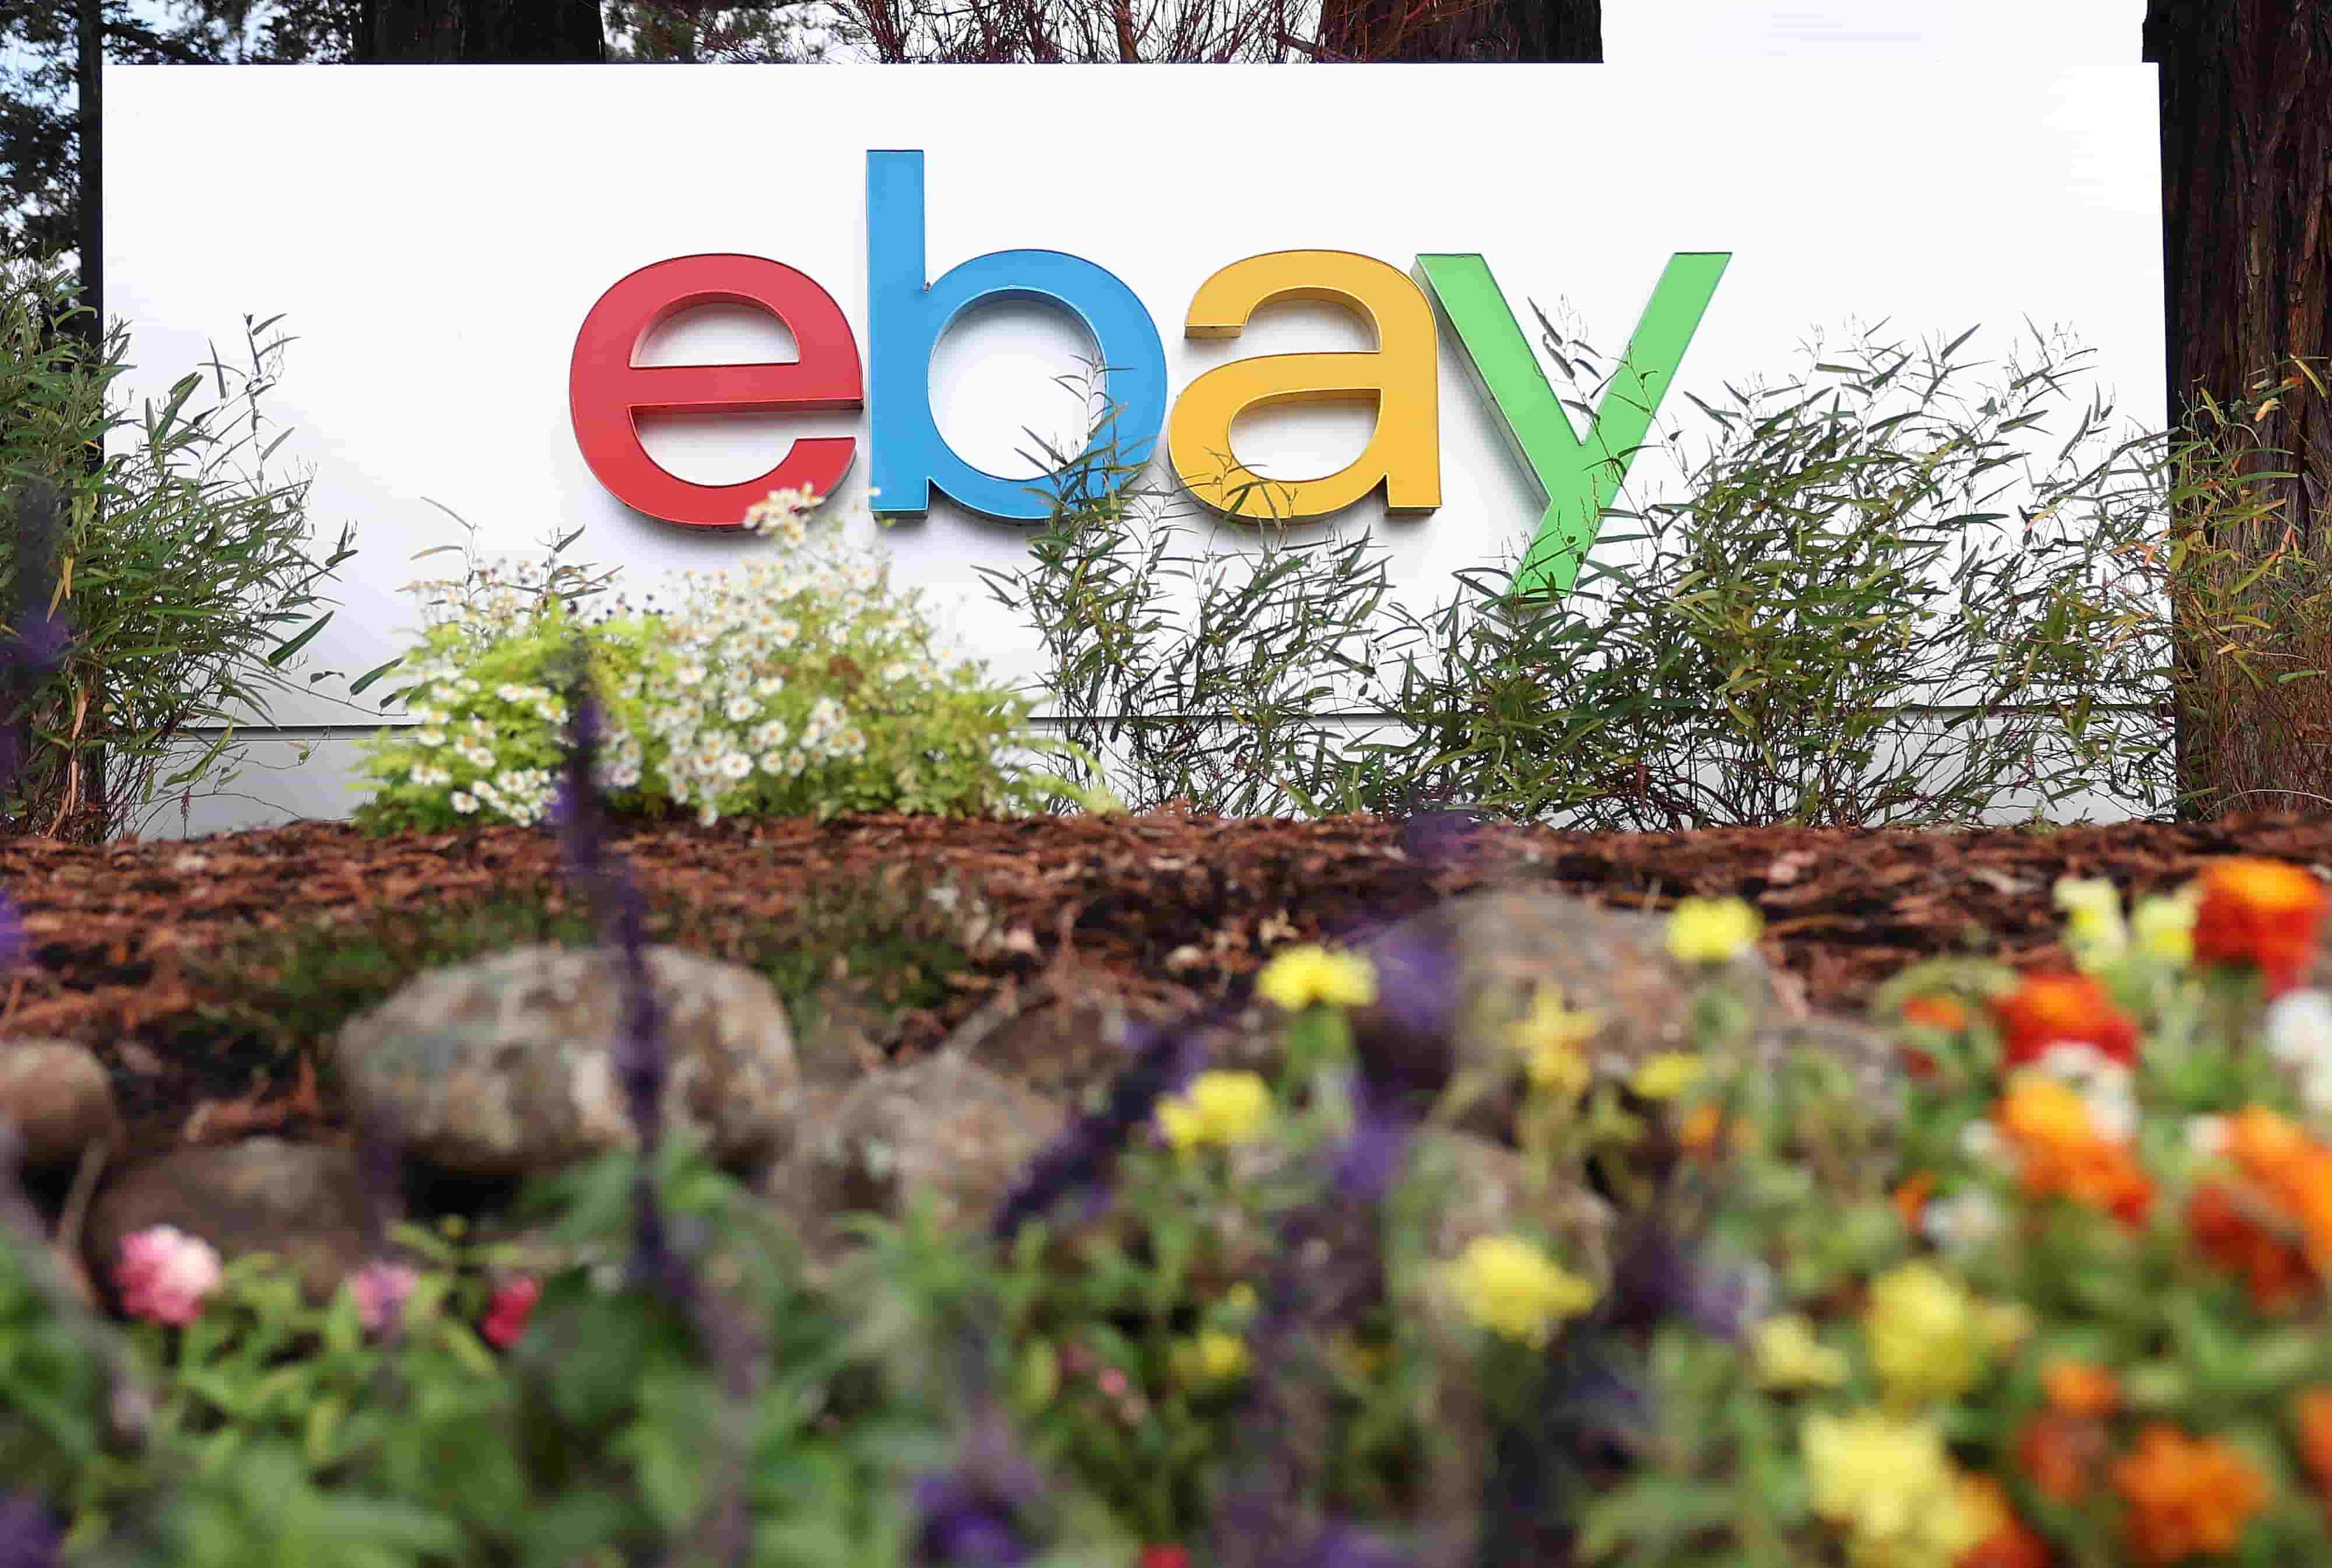 eBay to Pay $59M Over Sales of Drug-Making Tools